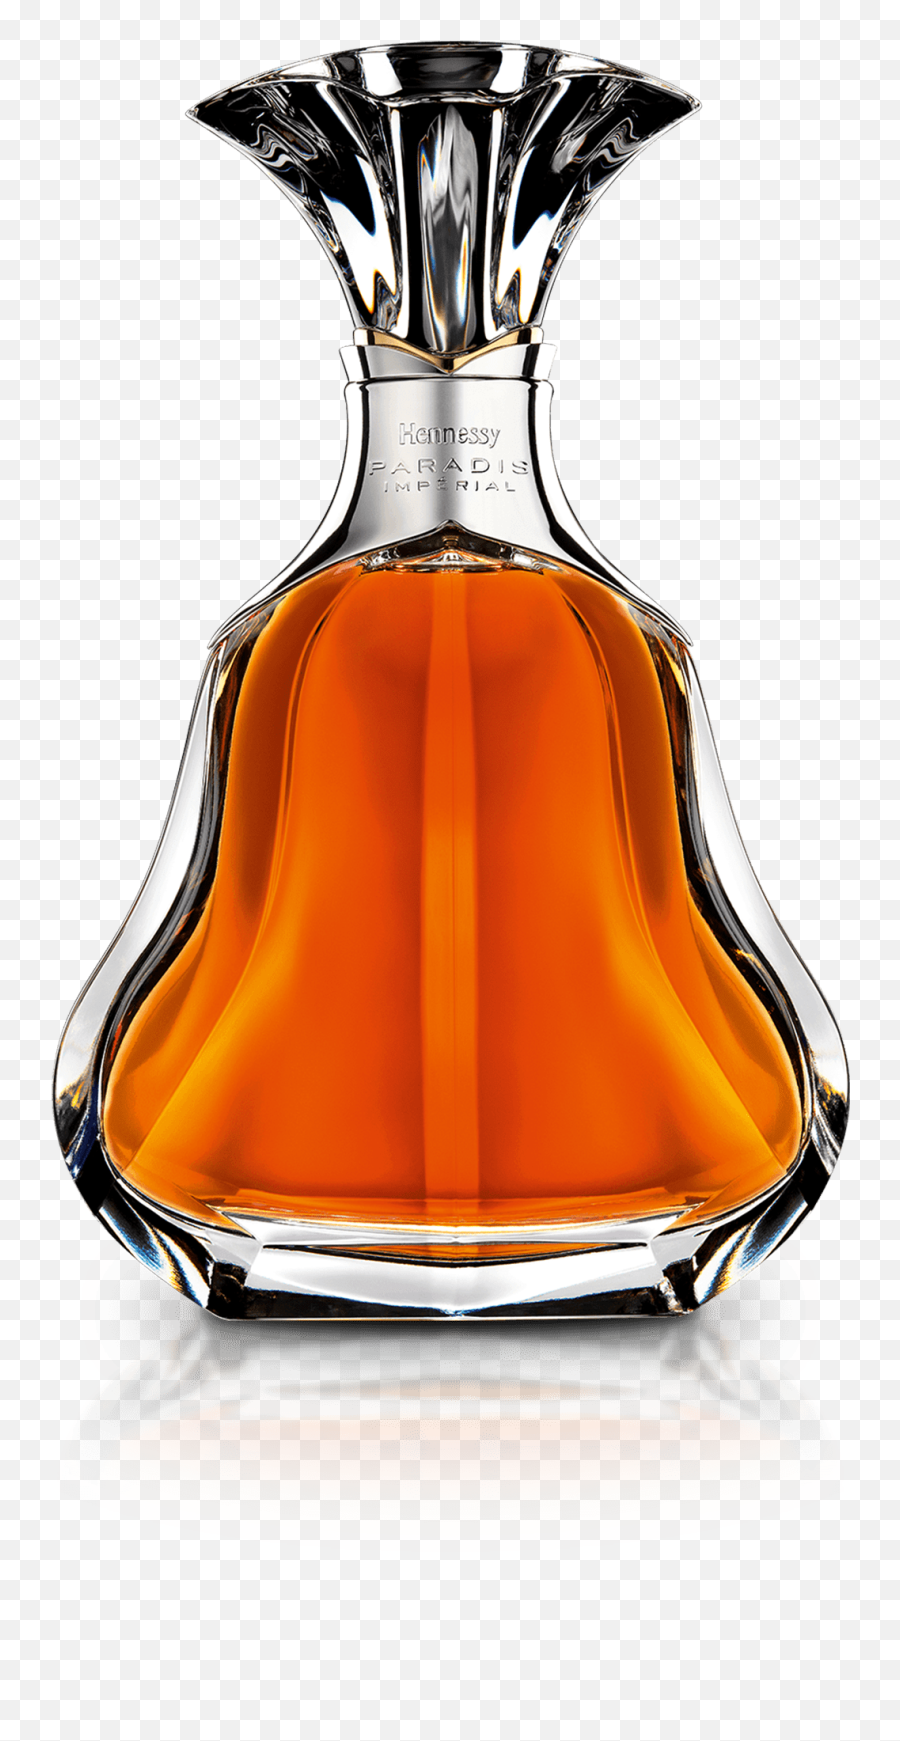 Download Hennessy Paradis Impérial - Hennessy Paradis Imperial Png,Hennessy Bottle Png